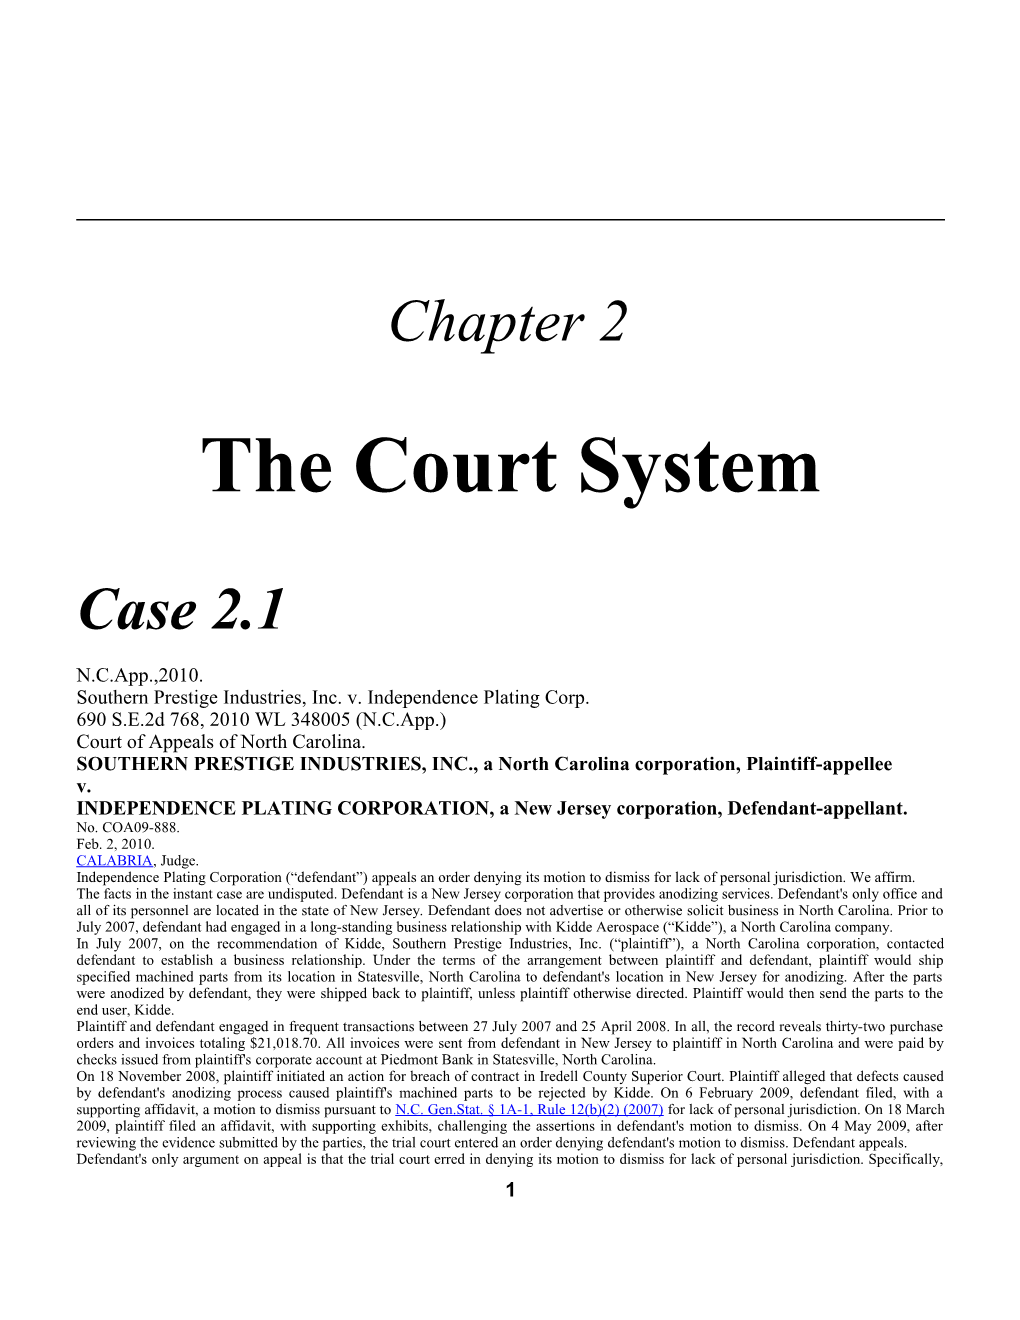 Chapter 2: the Court System 23